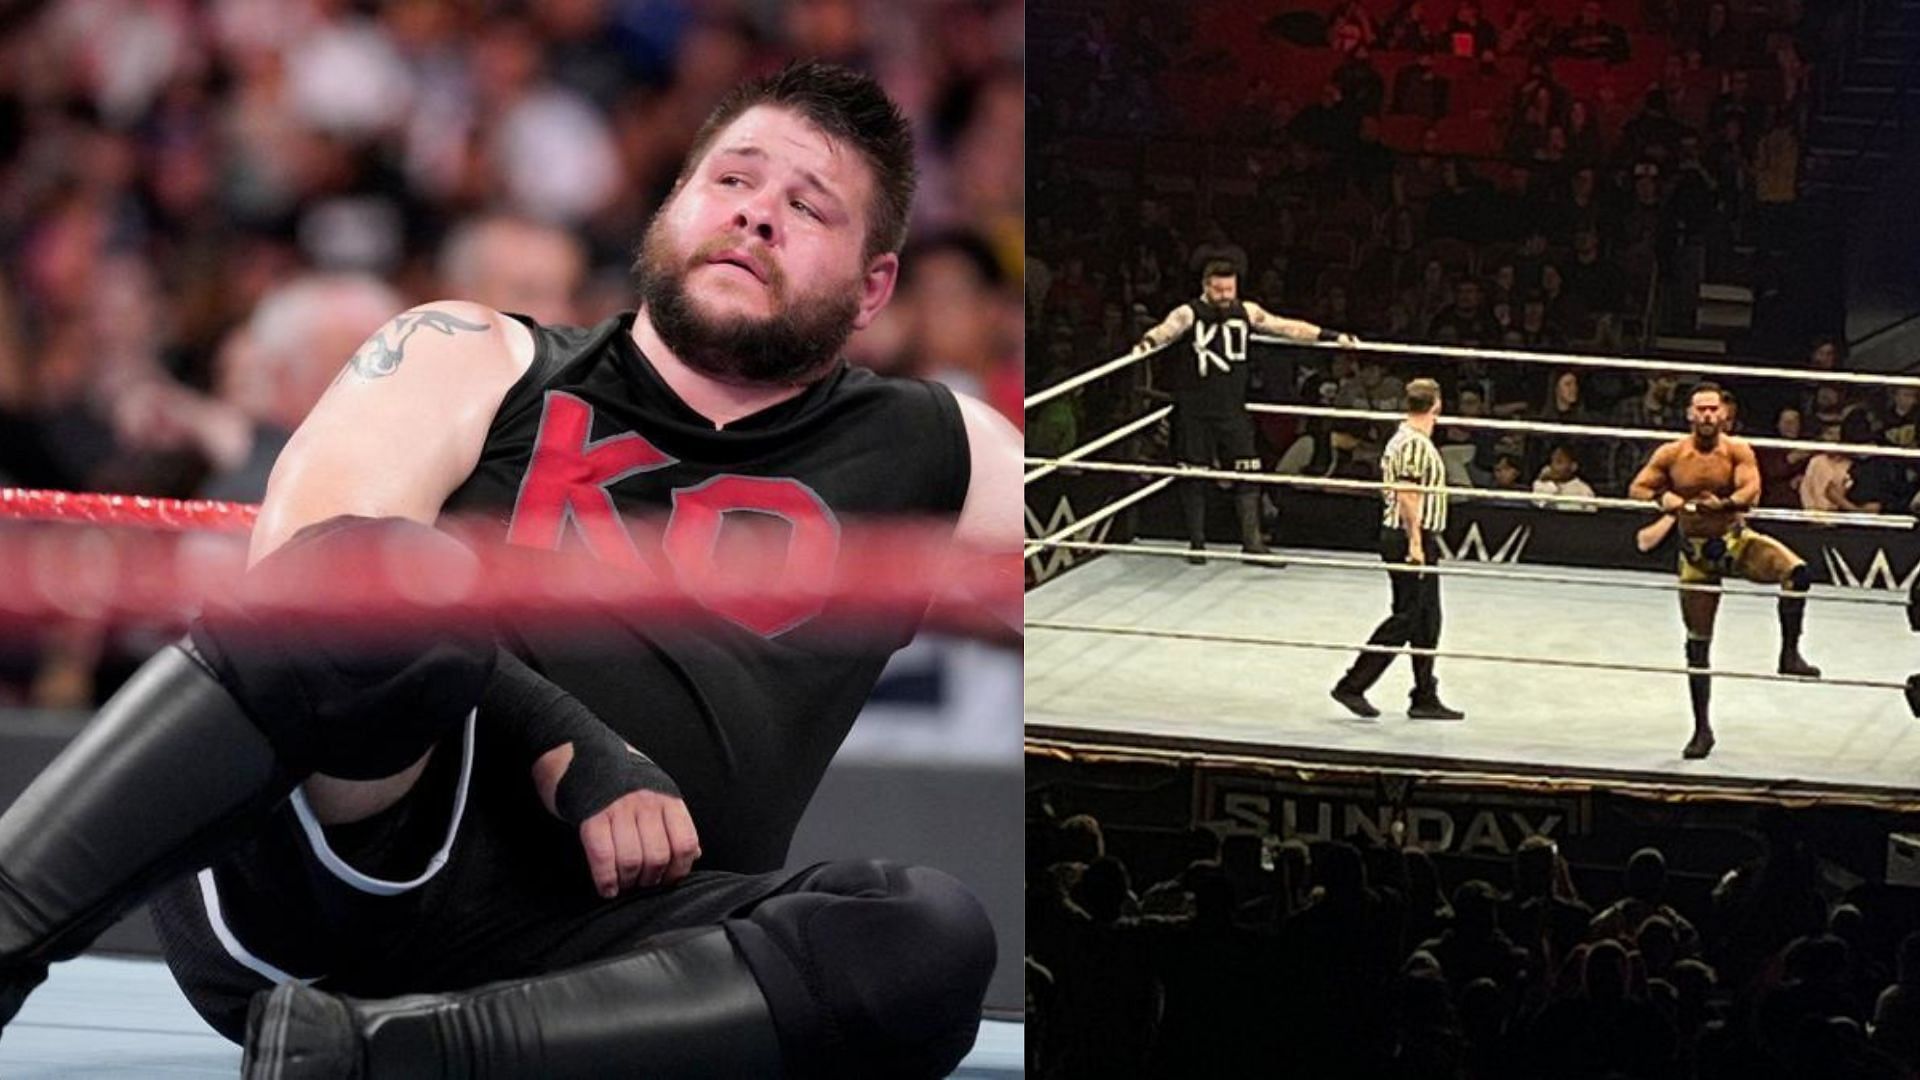 Potential bad news for Kevin Owens